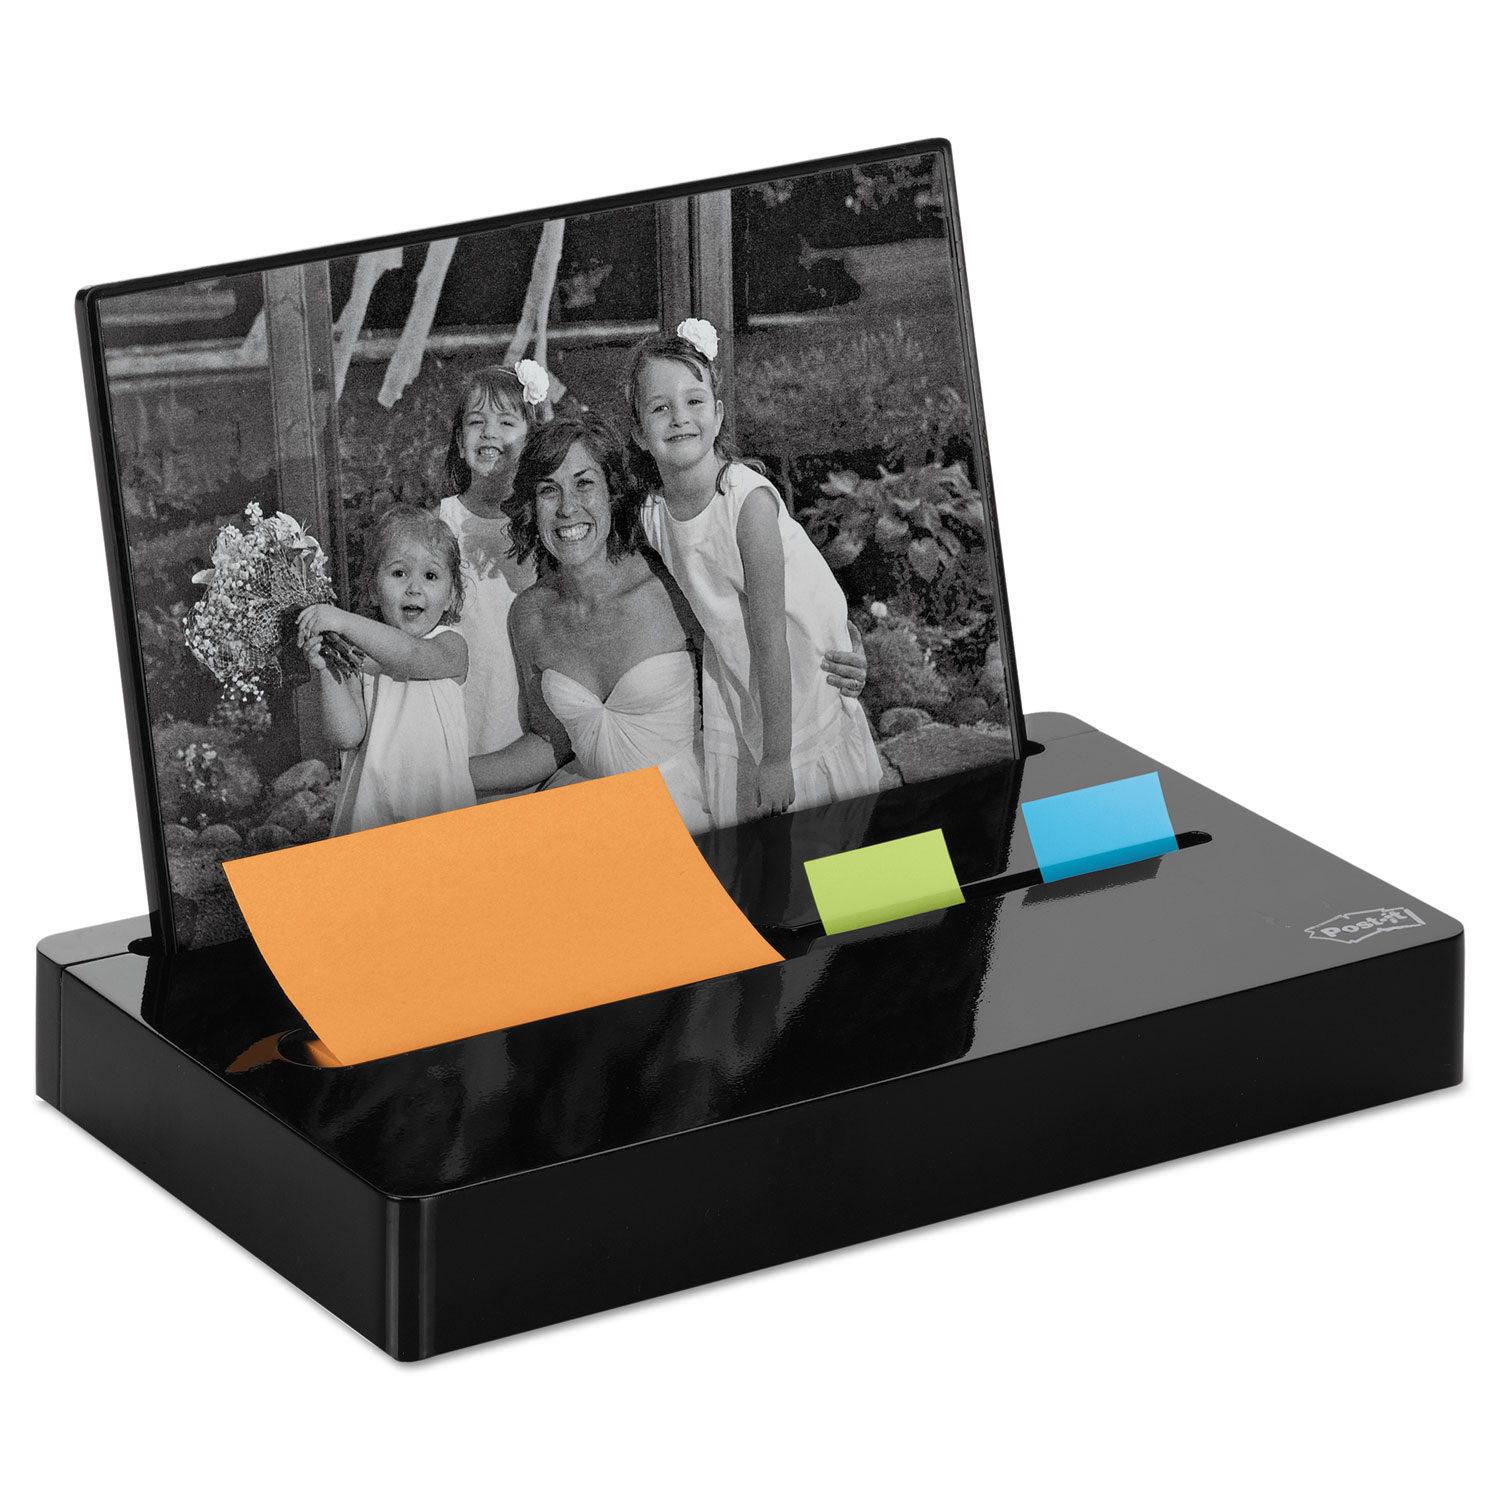  Post-it Pop-up Notes Super Sticky PH-100-BK Pop-up Note/Flag Dispenser Plus Photo Frame with 3 x 3 Pad, 50 1 Flags, Black (MMMPH100BK) 